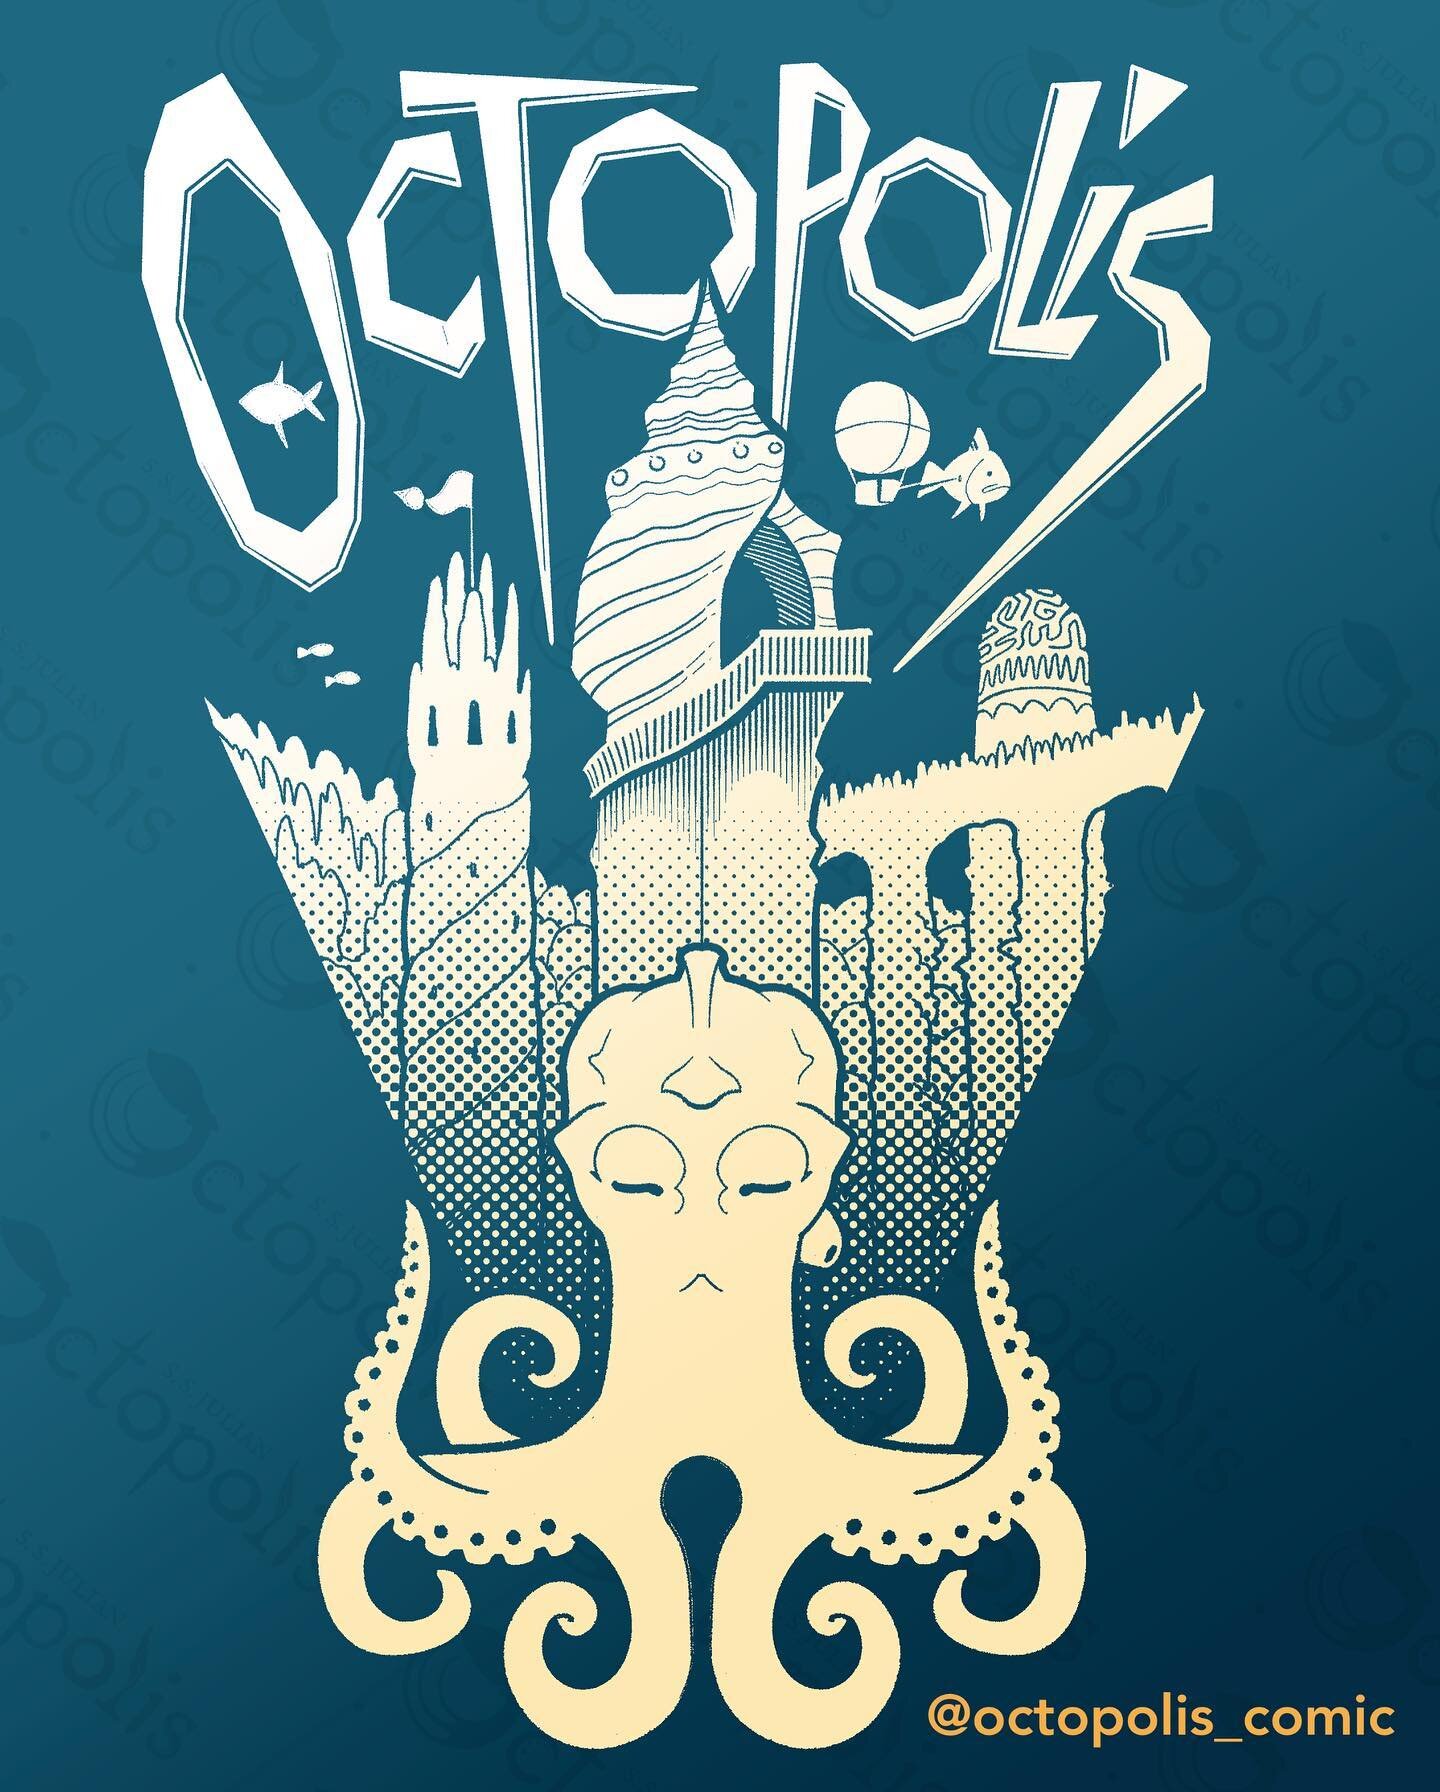 New graphic! Like if you&rsquo;d be interested in a shirt with this design, so I can gauge interest about a print run.

#octopus #comic #tshirt #graphicdesign